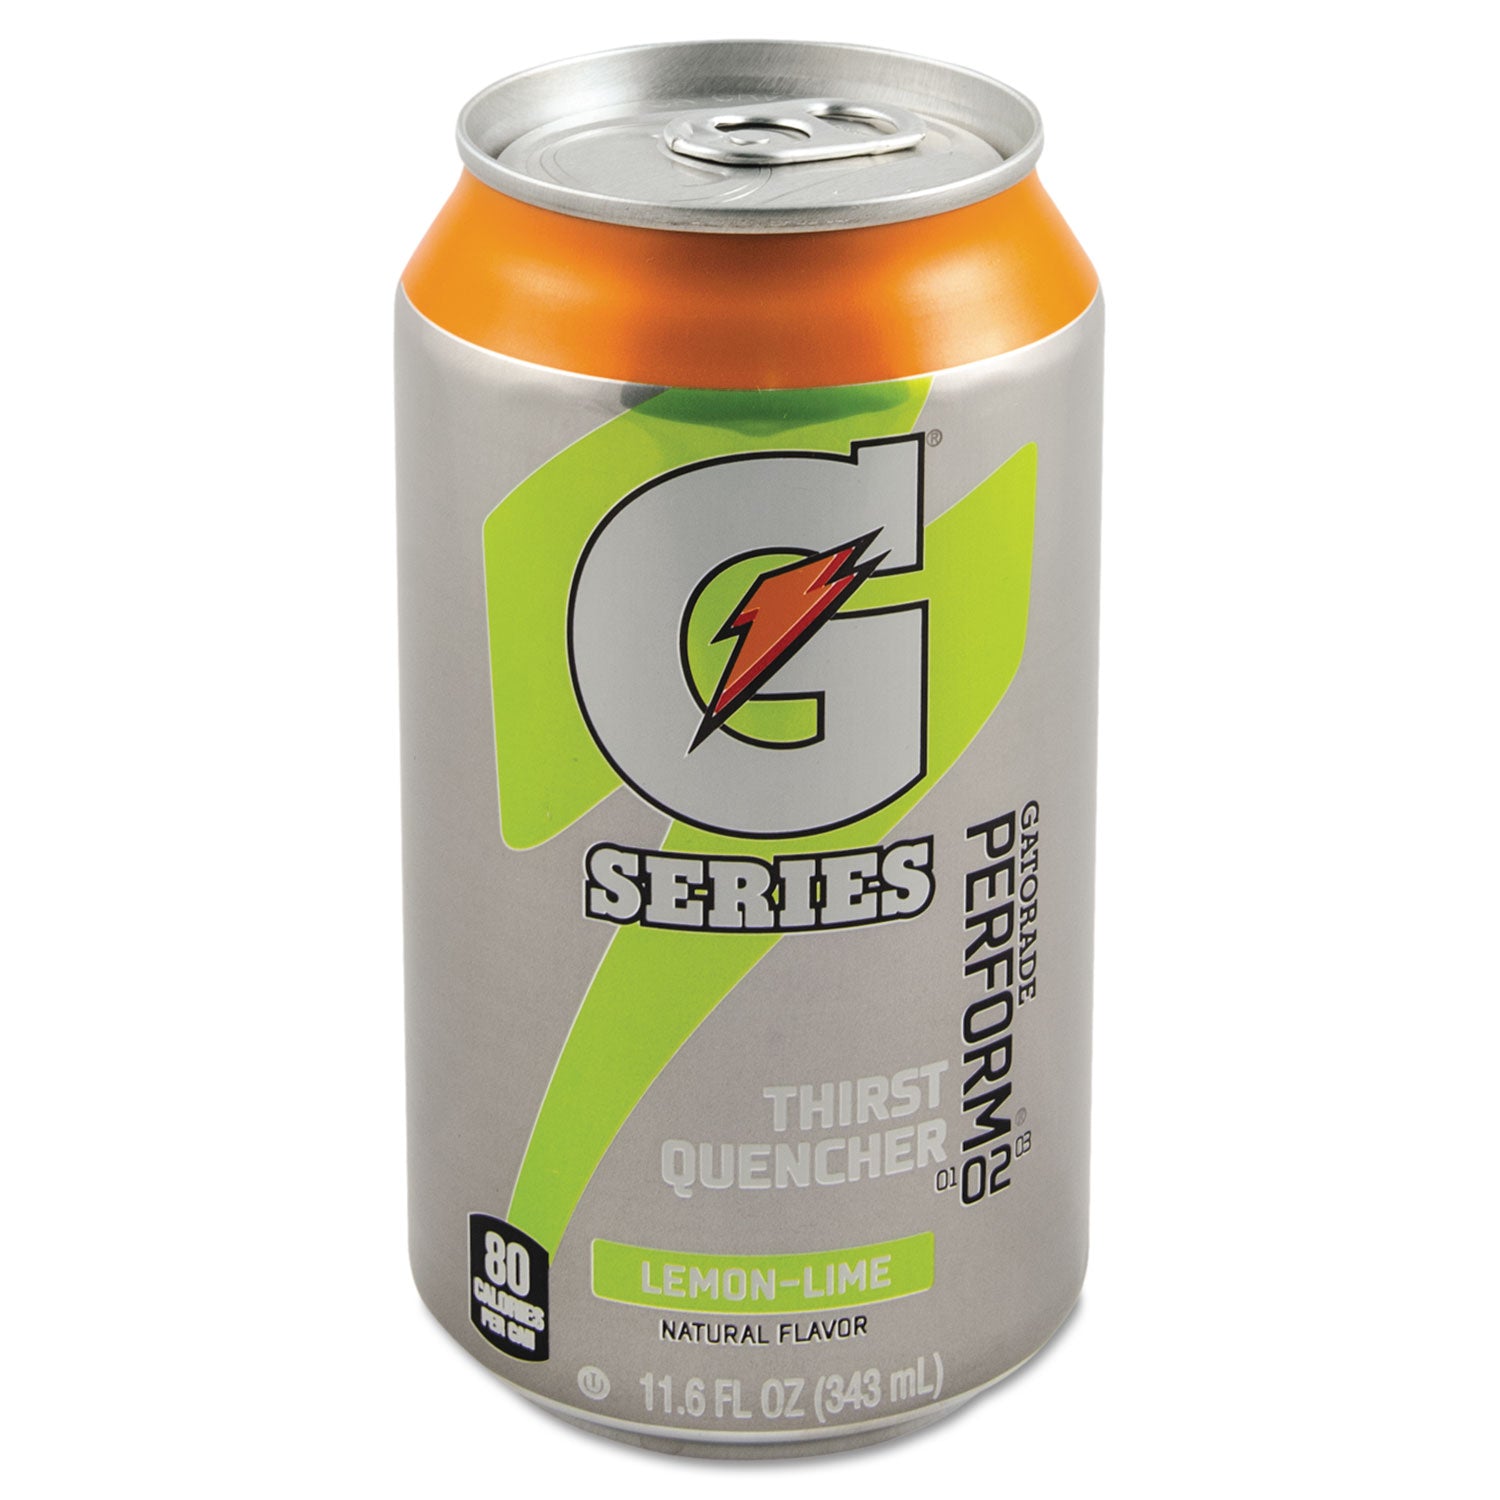 thirst-quencher-can-lemon-lime-116oz-can-24-carton_gtd00901 - 1